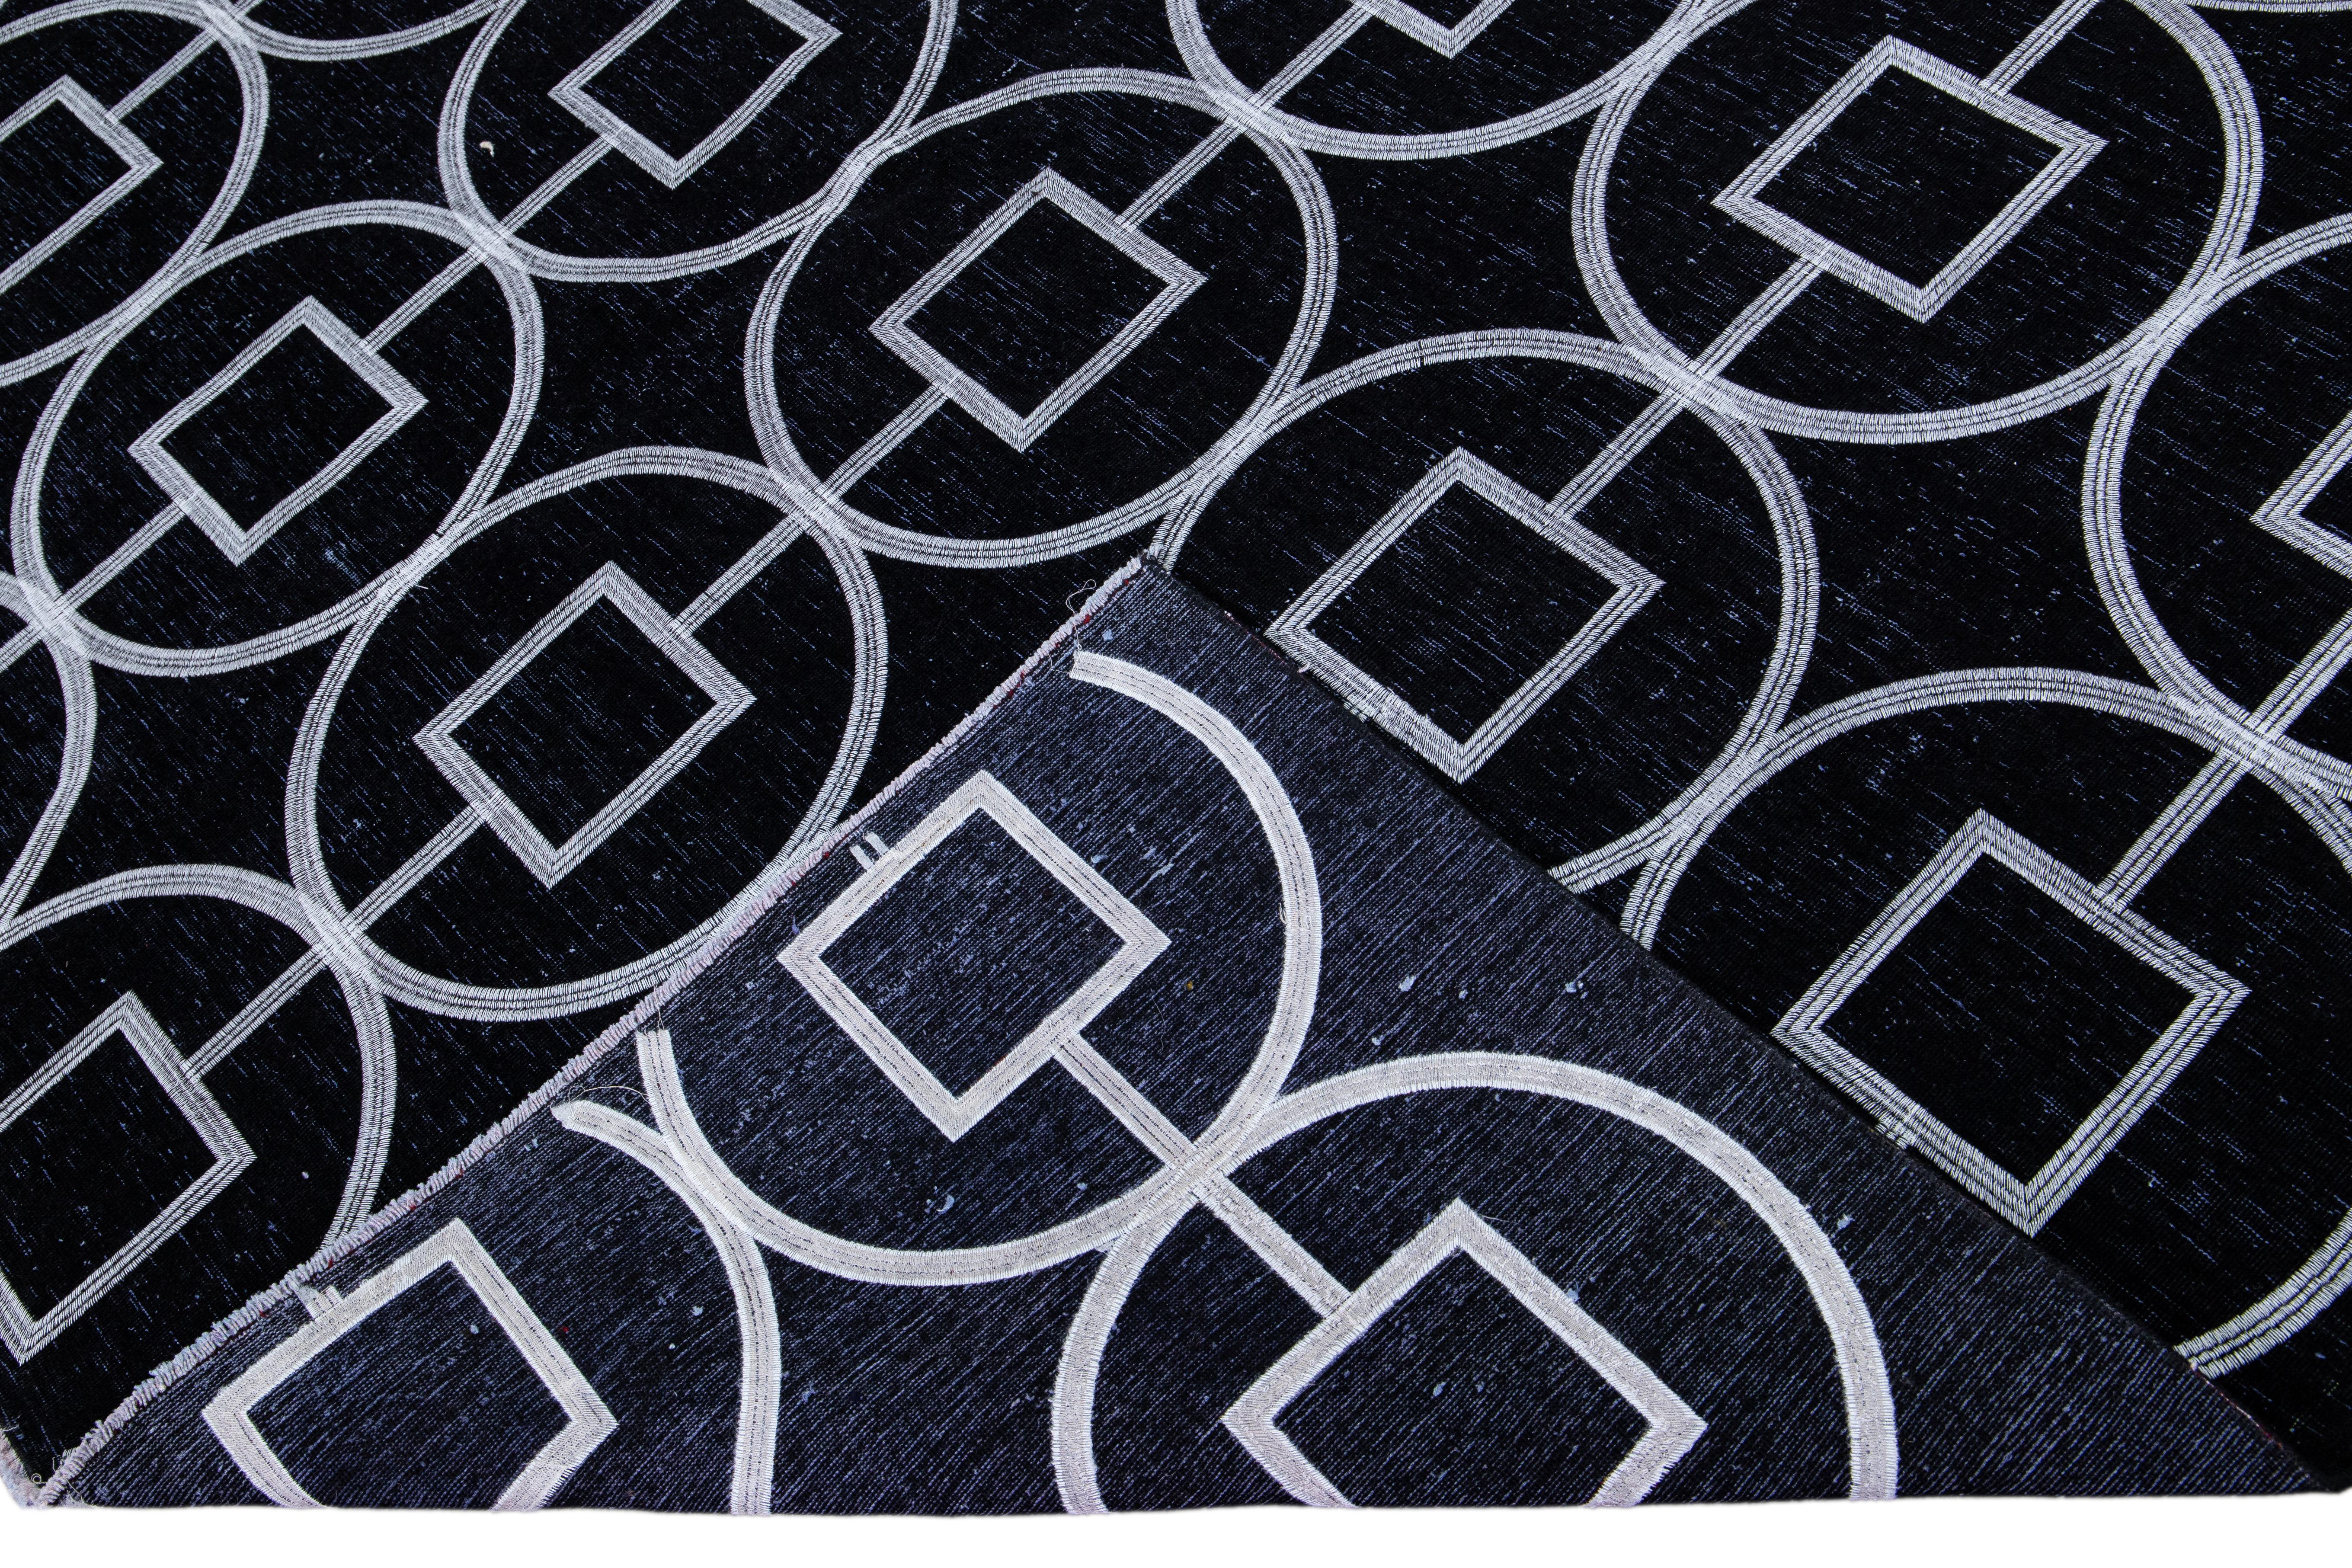 Beautiful Turkish handmade wool rug with a black distress look field. This Modern rug has white accents featuring a gorgeous all-over geometric pattern design.

This rug measures: 8'1